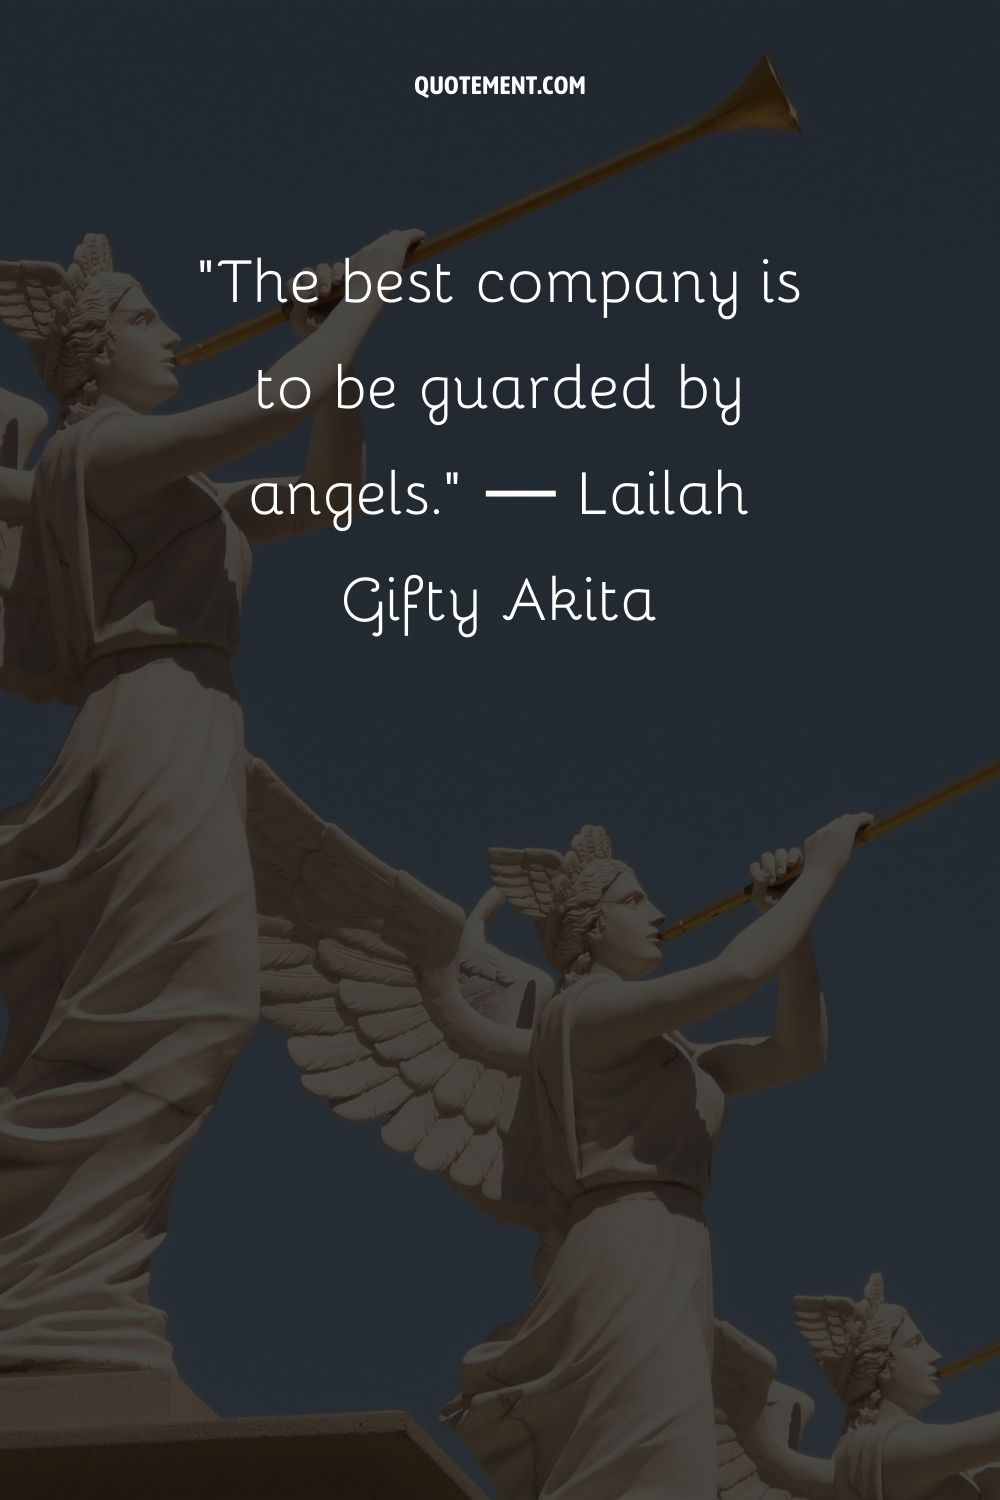 The best company is to be guarded by angels.